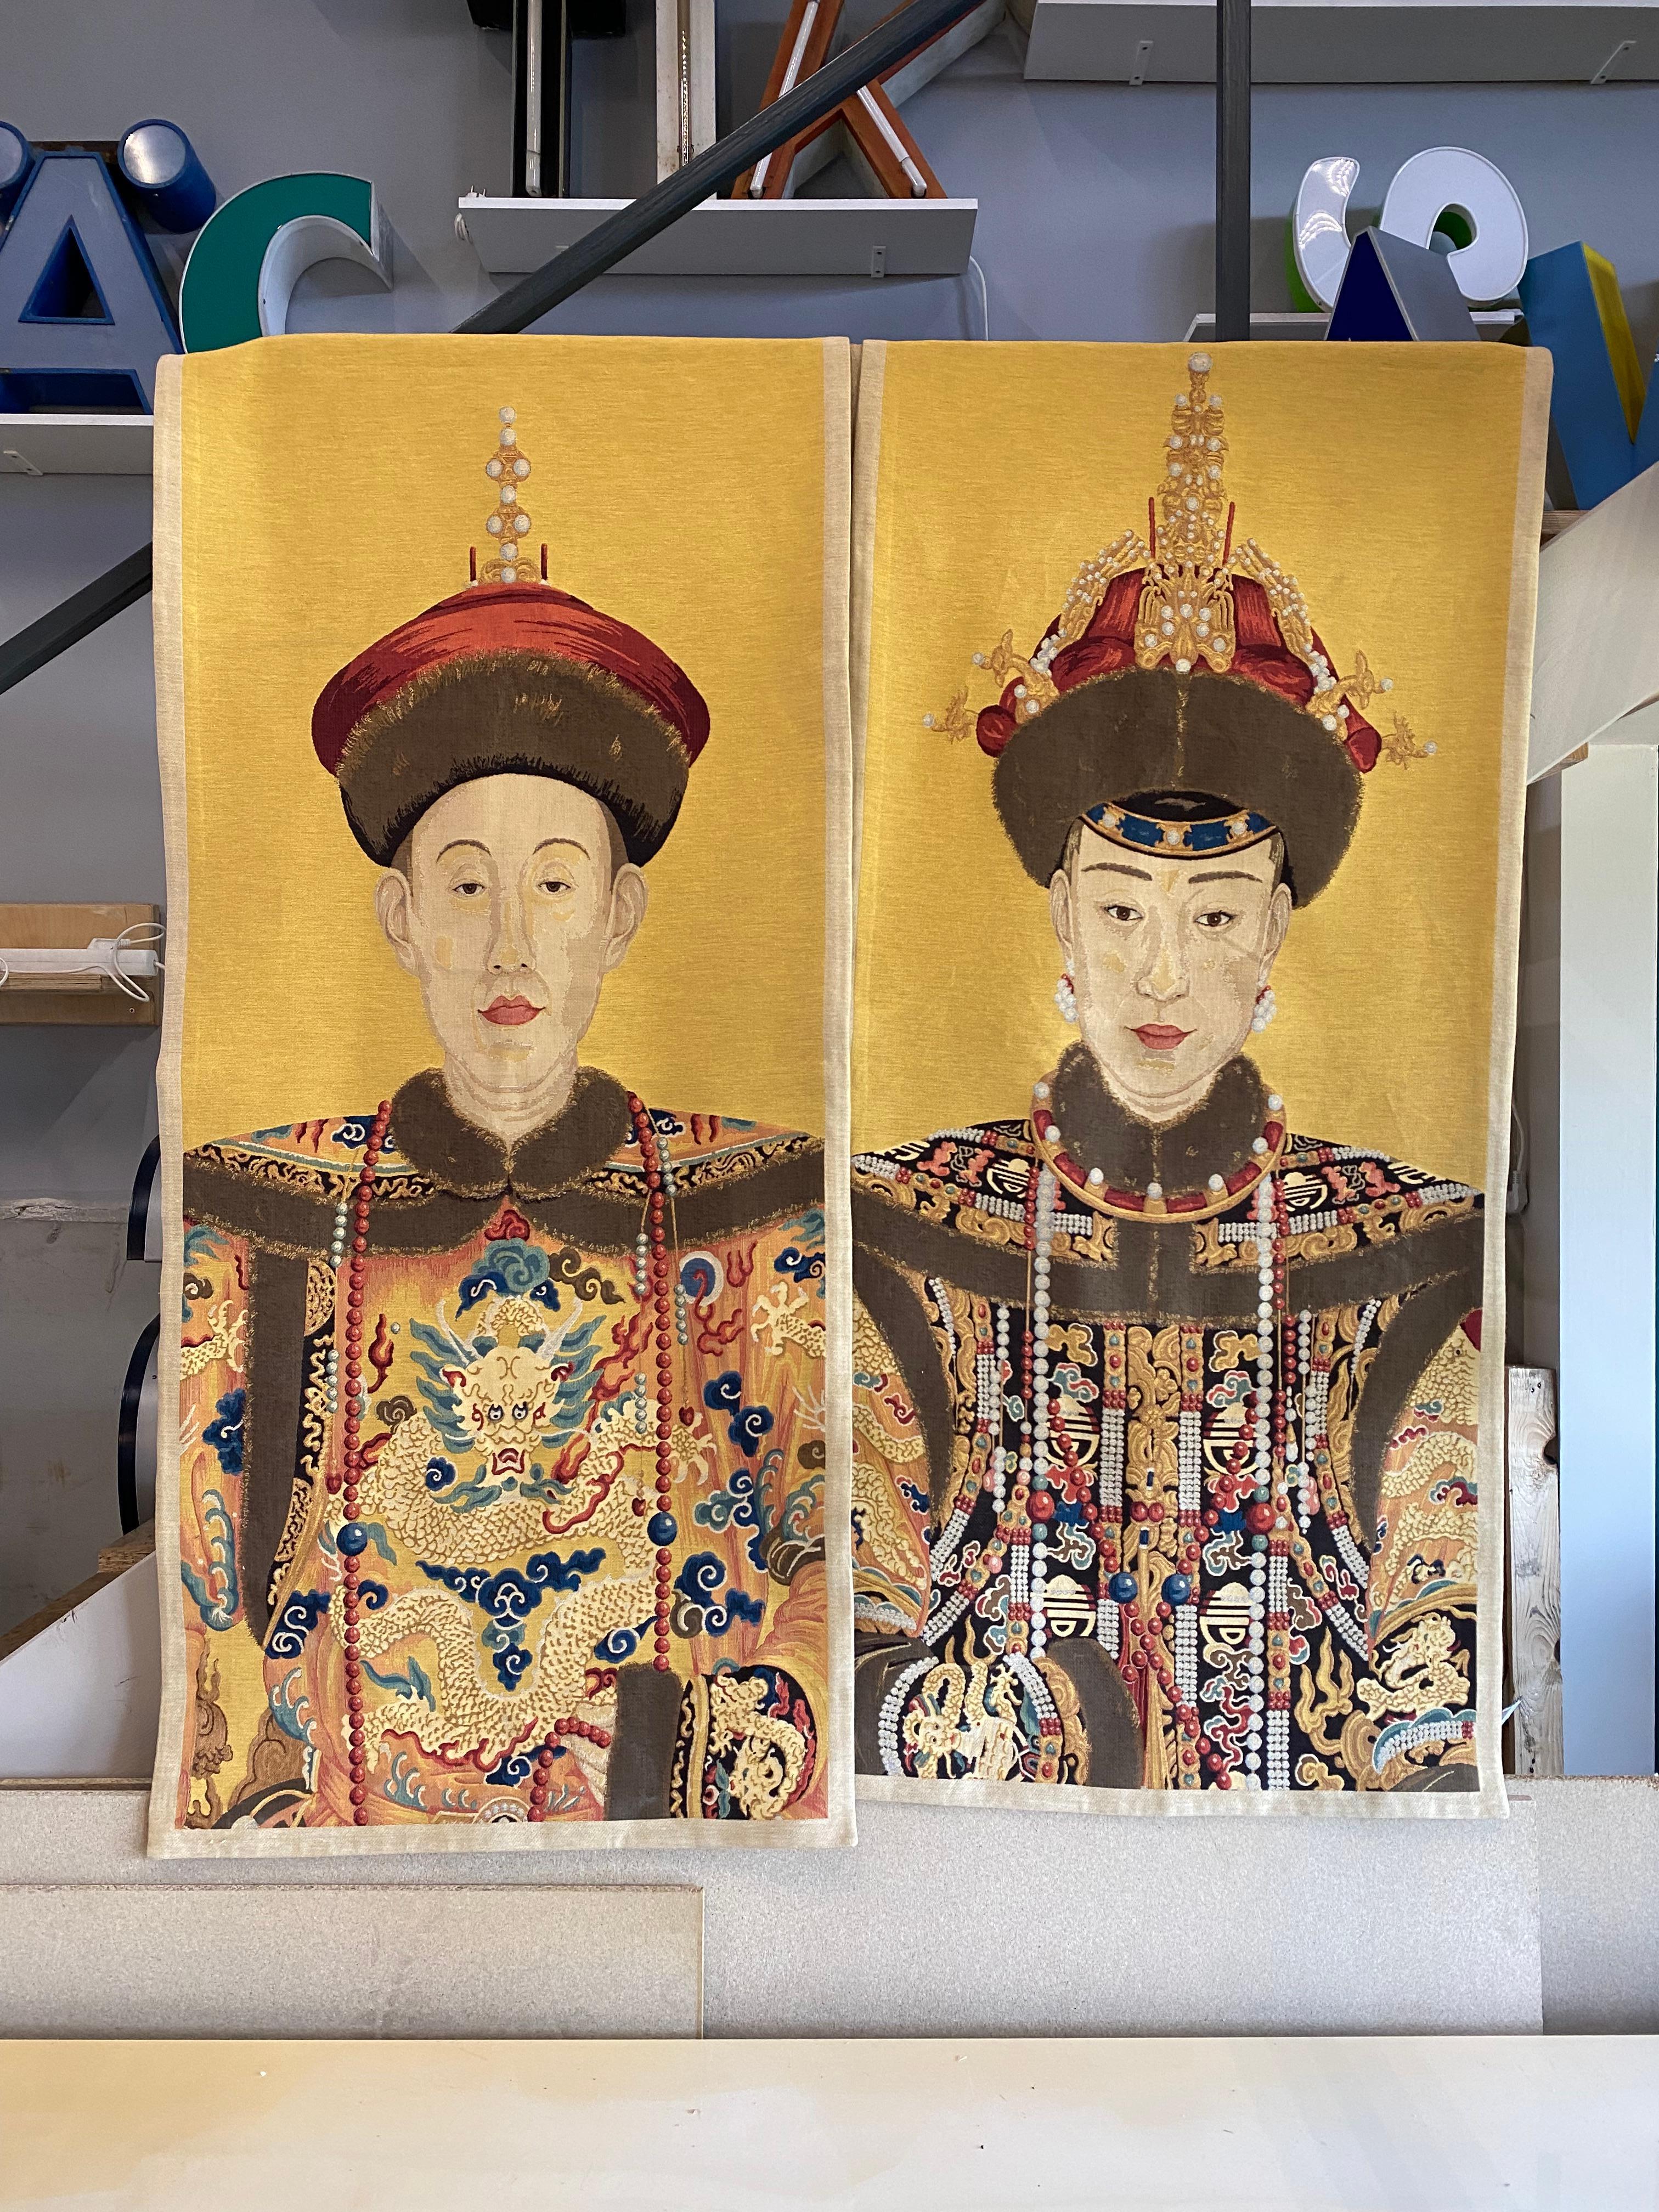 Pair of large textile portraits of a Chinese imperial couple of the Ming Dynasty. The murals date from the 20th century and can decorate a large wall very impressively. The portraits are probably of an imperial couple, as the subjects are dressed in